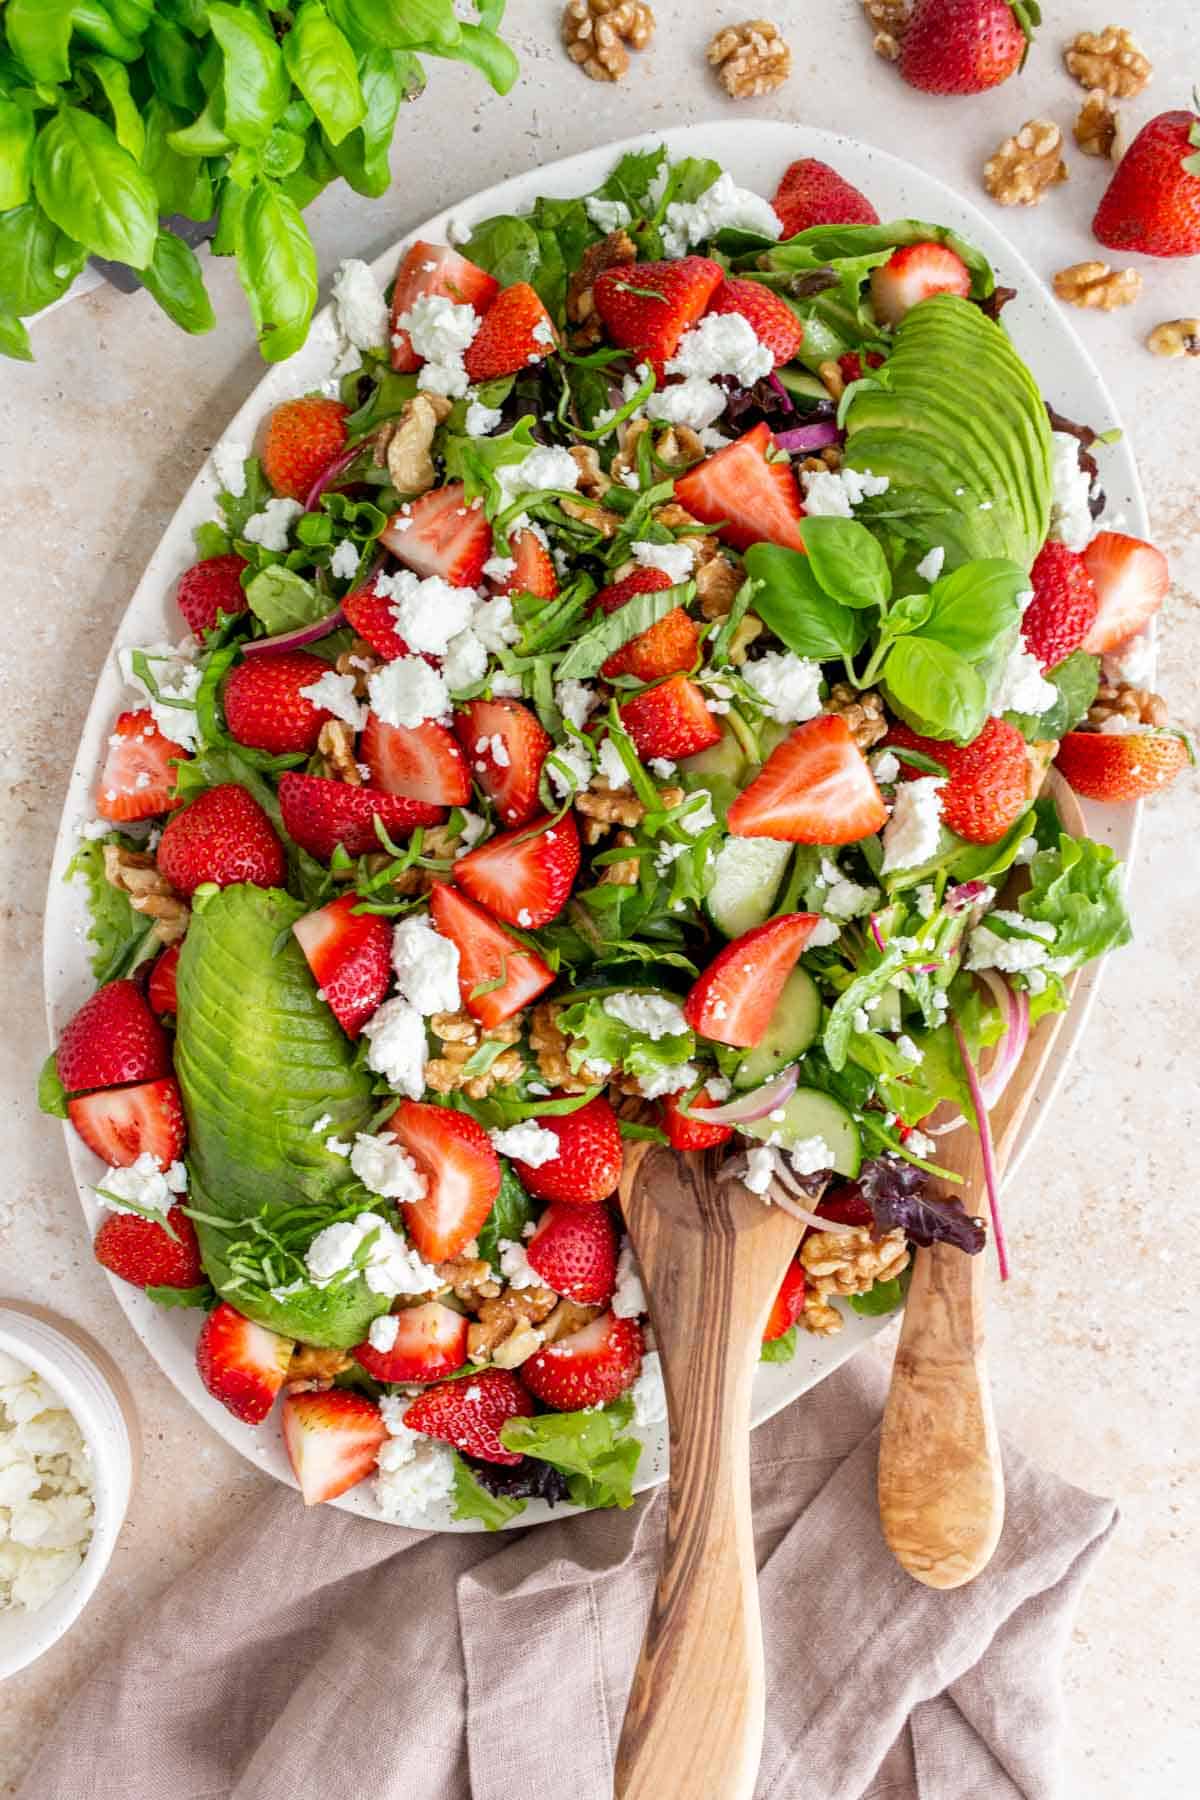 Overhead view of a large serving platter of strawberry goat cheese salad with avcado and wooden serving spoons inside the salad.